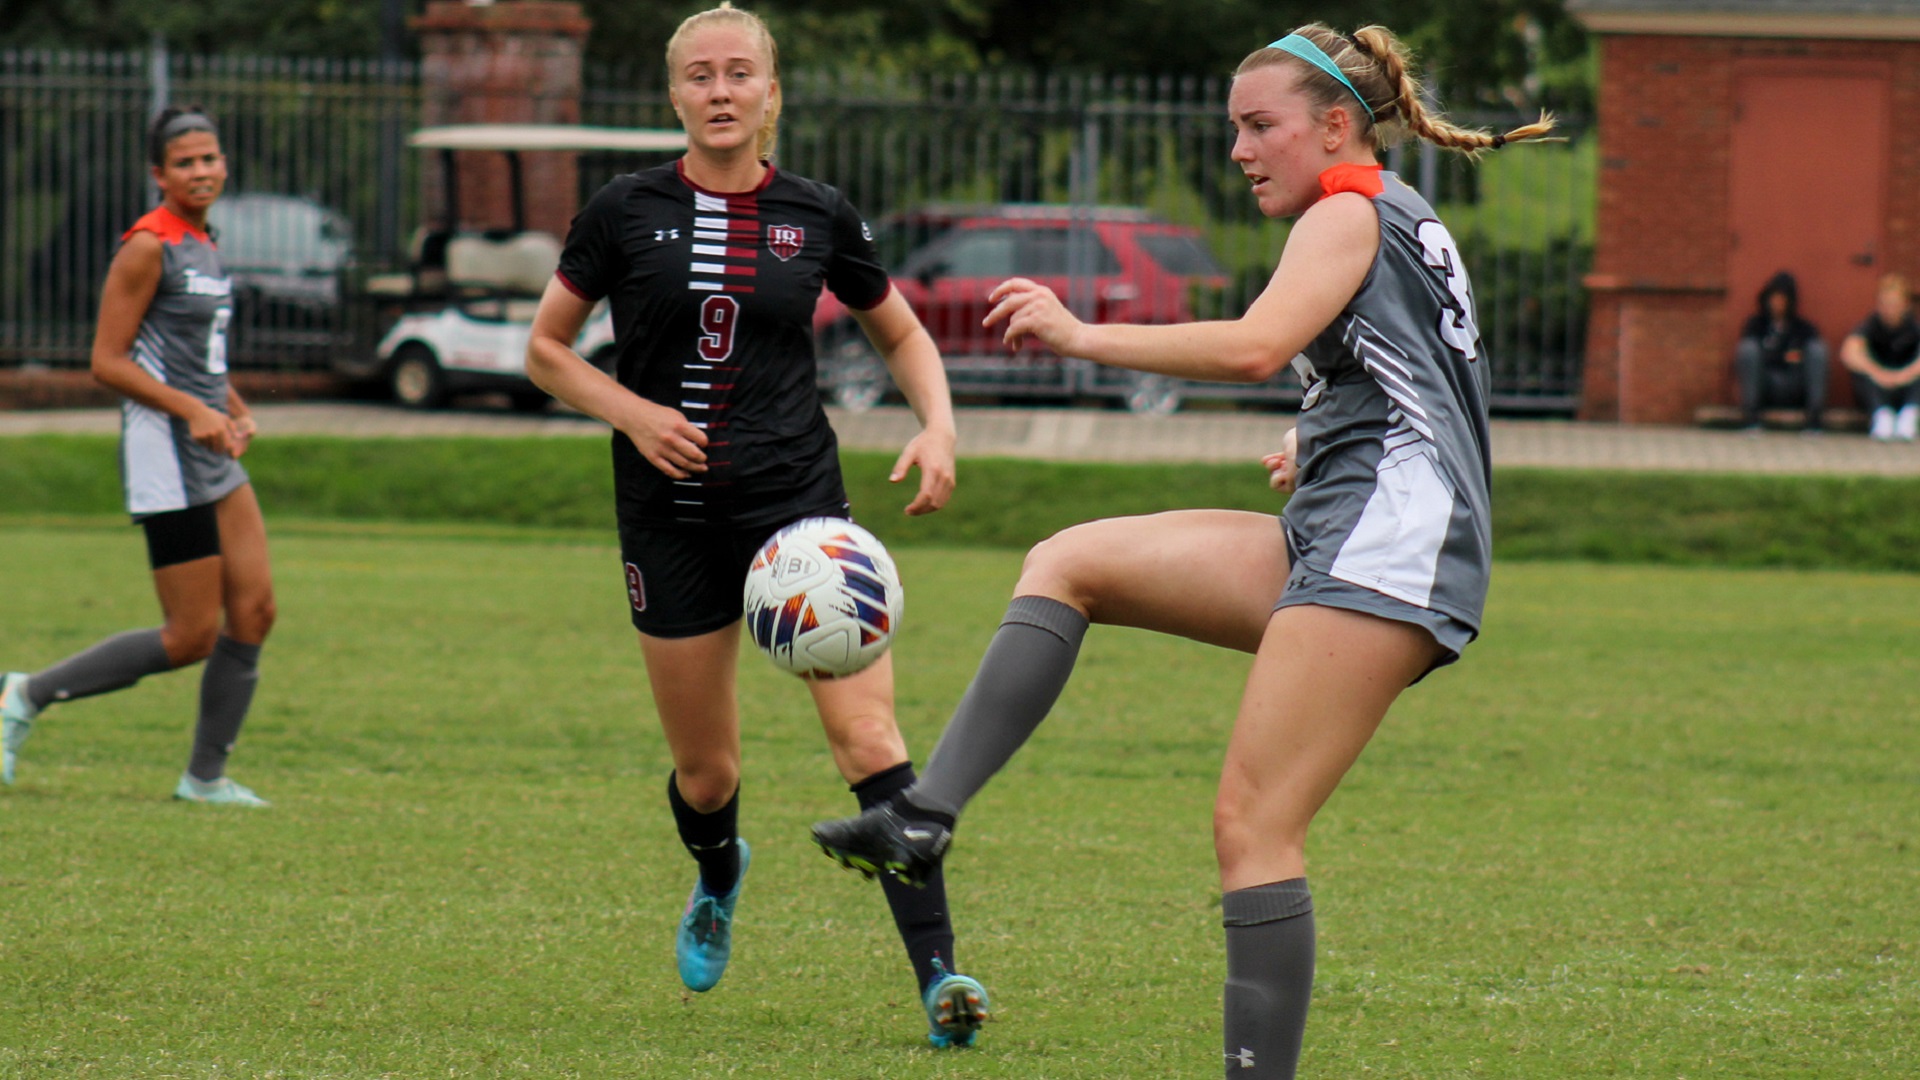 Ella Funderburk made her first start of the season on defense for the Pioneers against Lenoir-Rhyne (photo by student photographer Kari Ham)